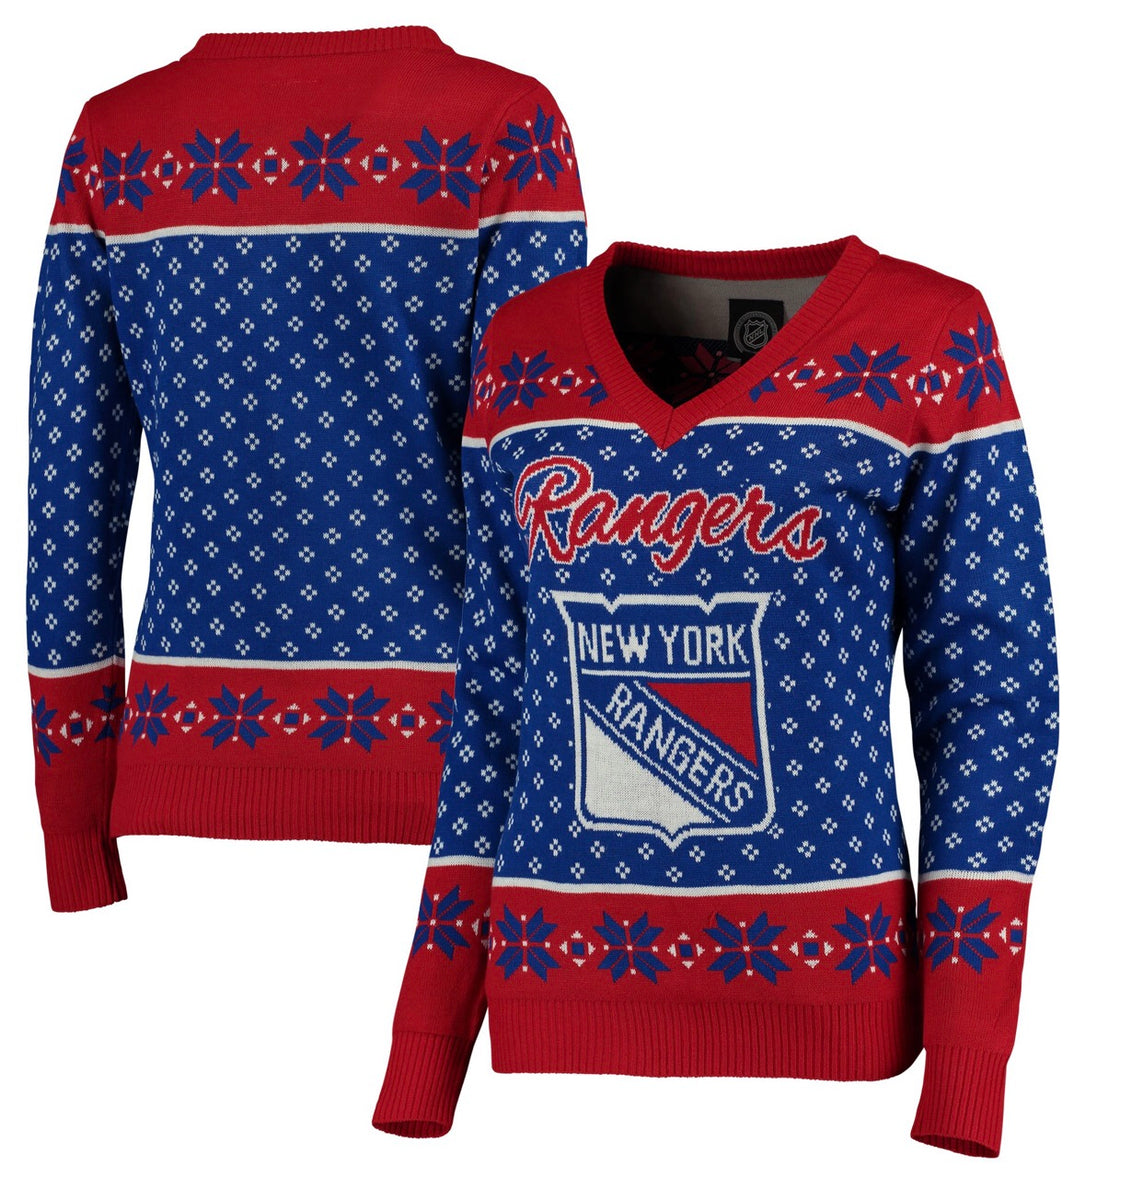 Klew Men's New York Rangers Holiday Ugly Sweater Blue/Red - Small